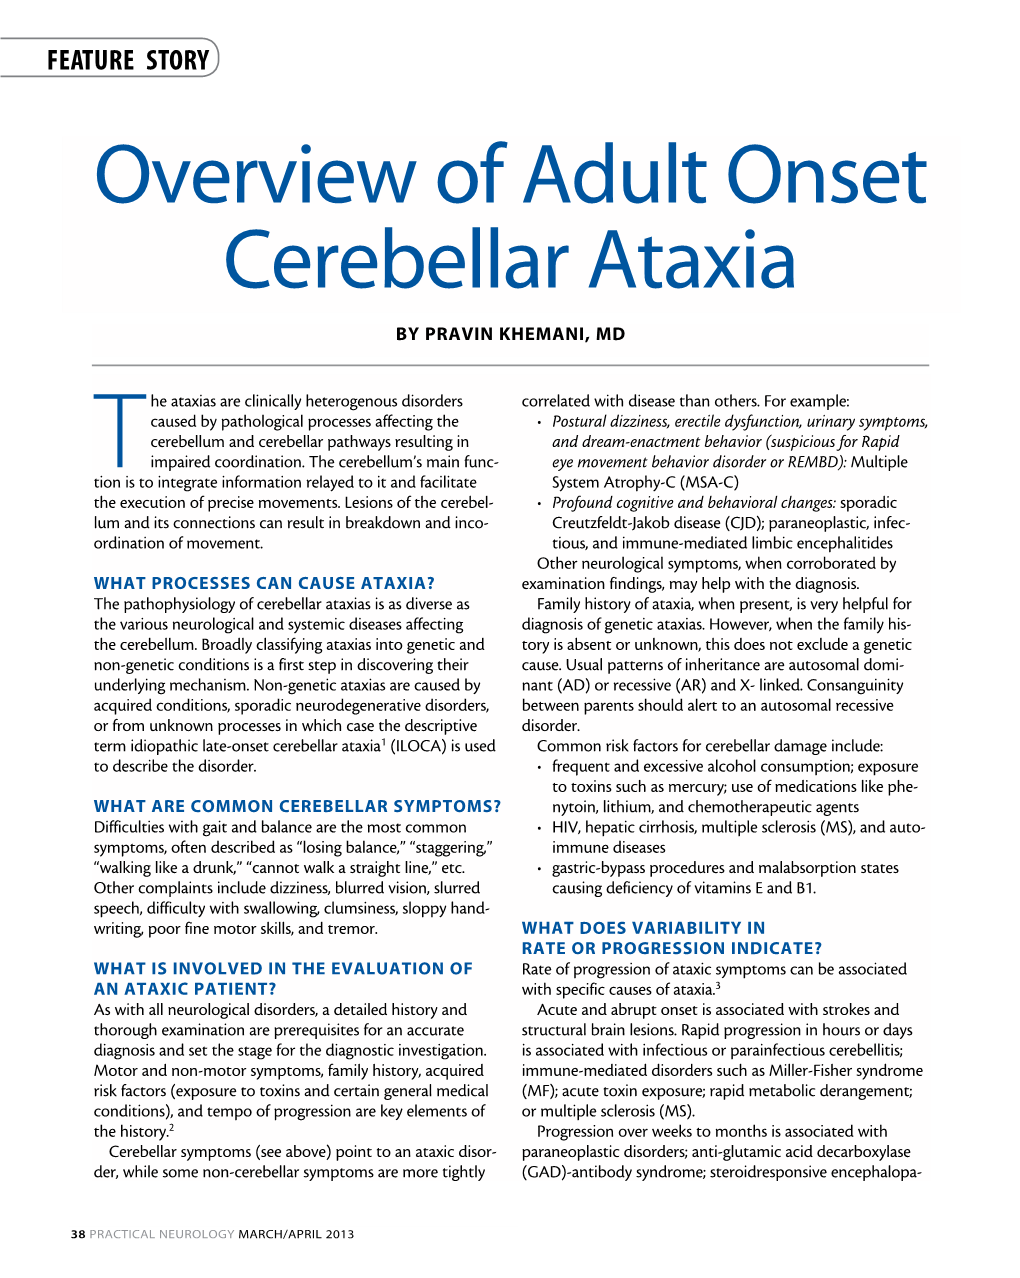 Overview of Adult Onset Cerebellar Ataxia by Pravin Khemani, MD